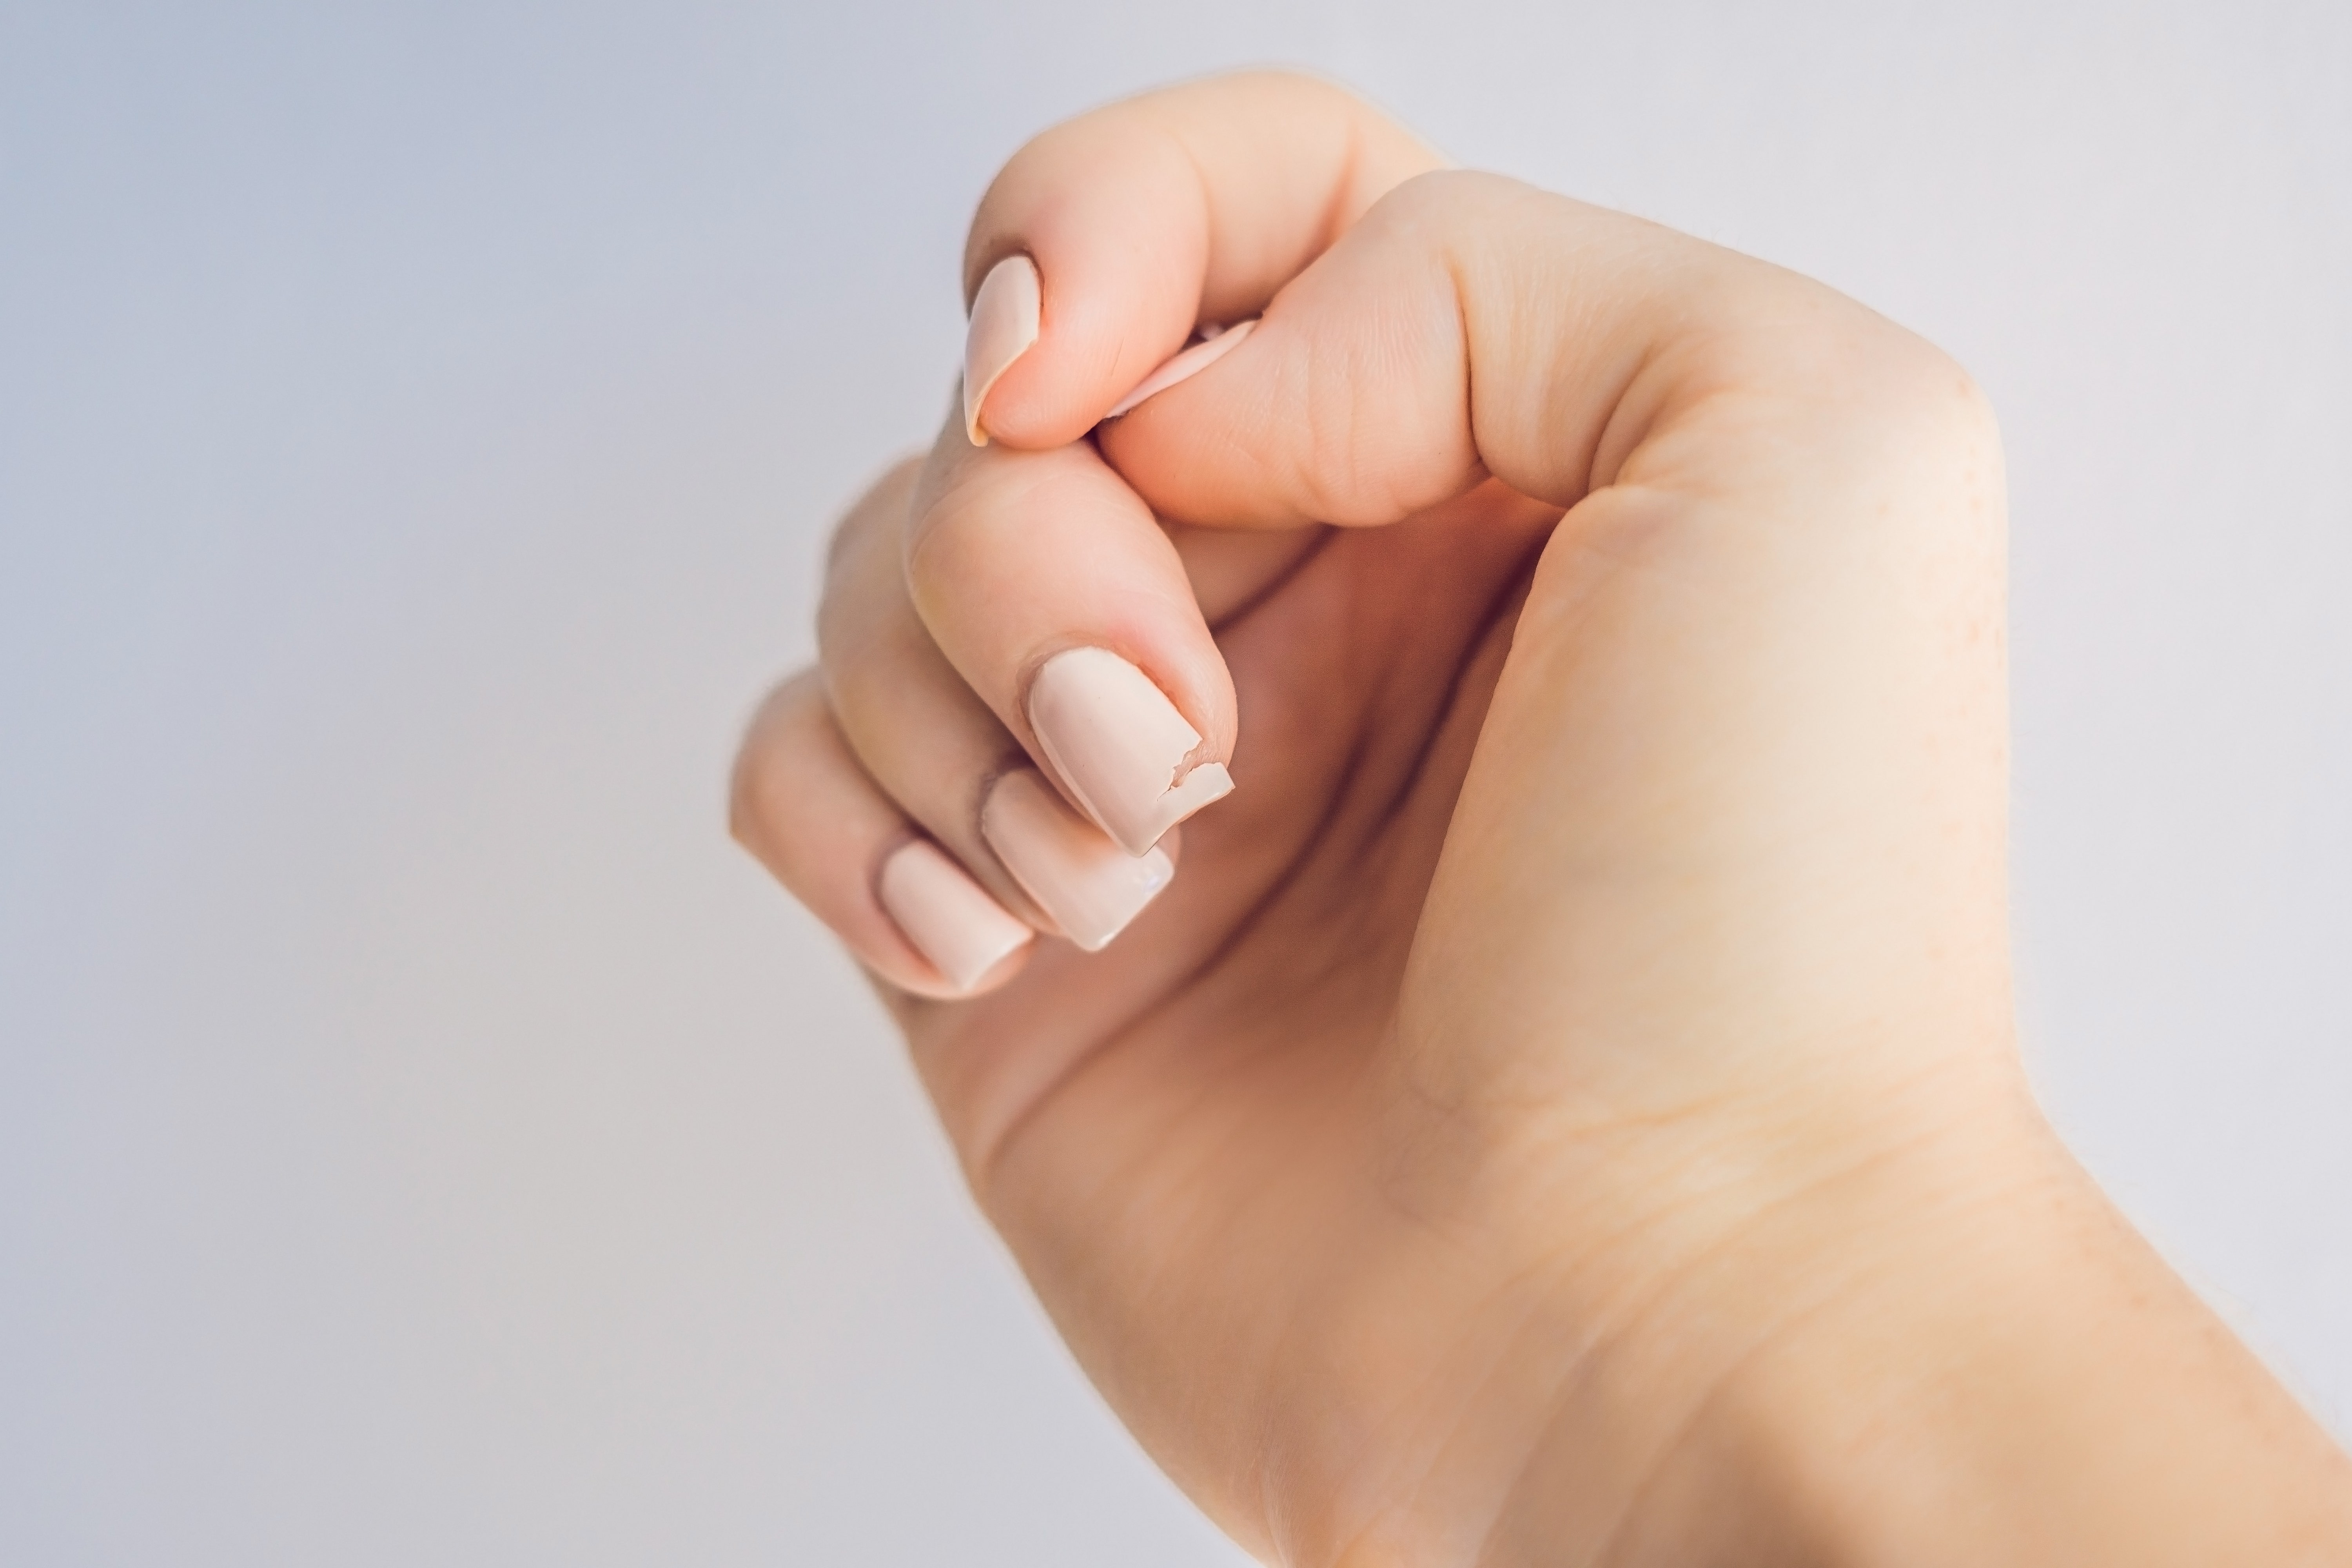 How to Fix a Chipped or Broken Nail